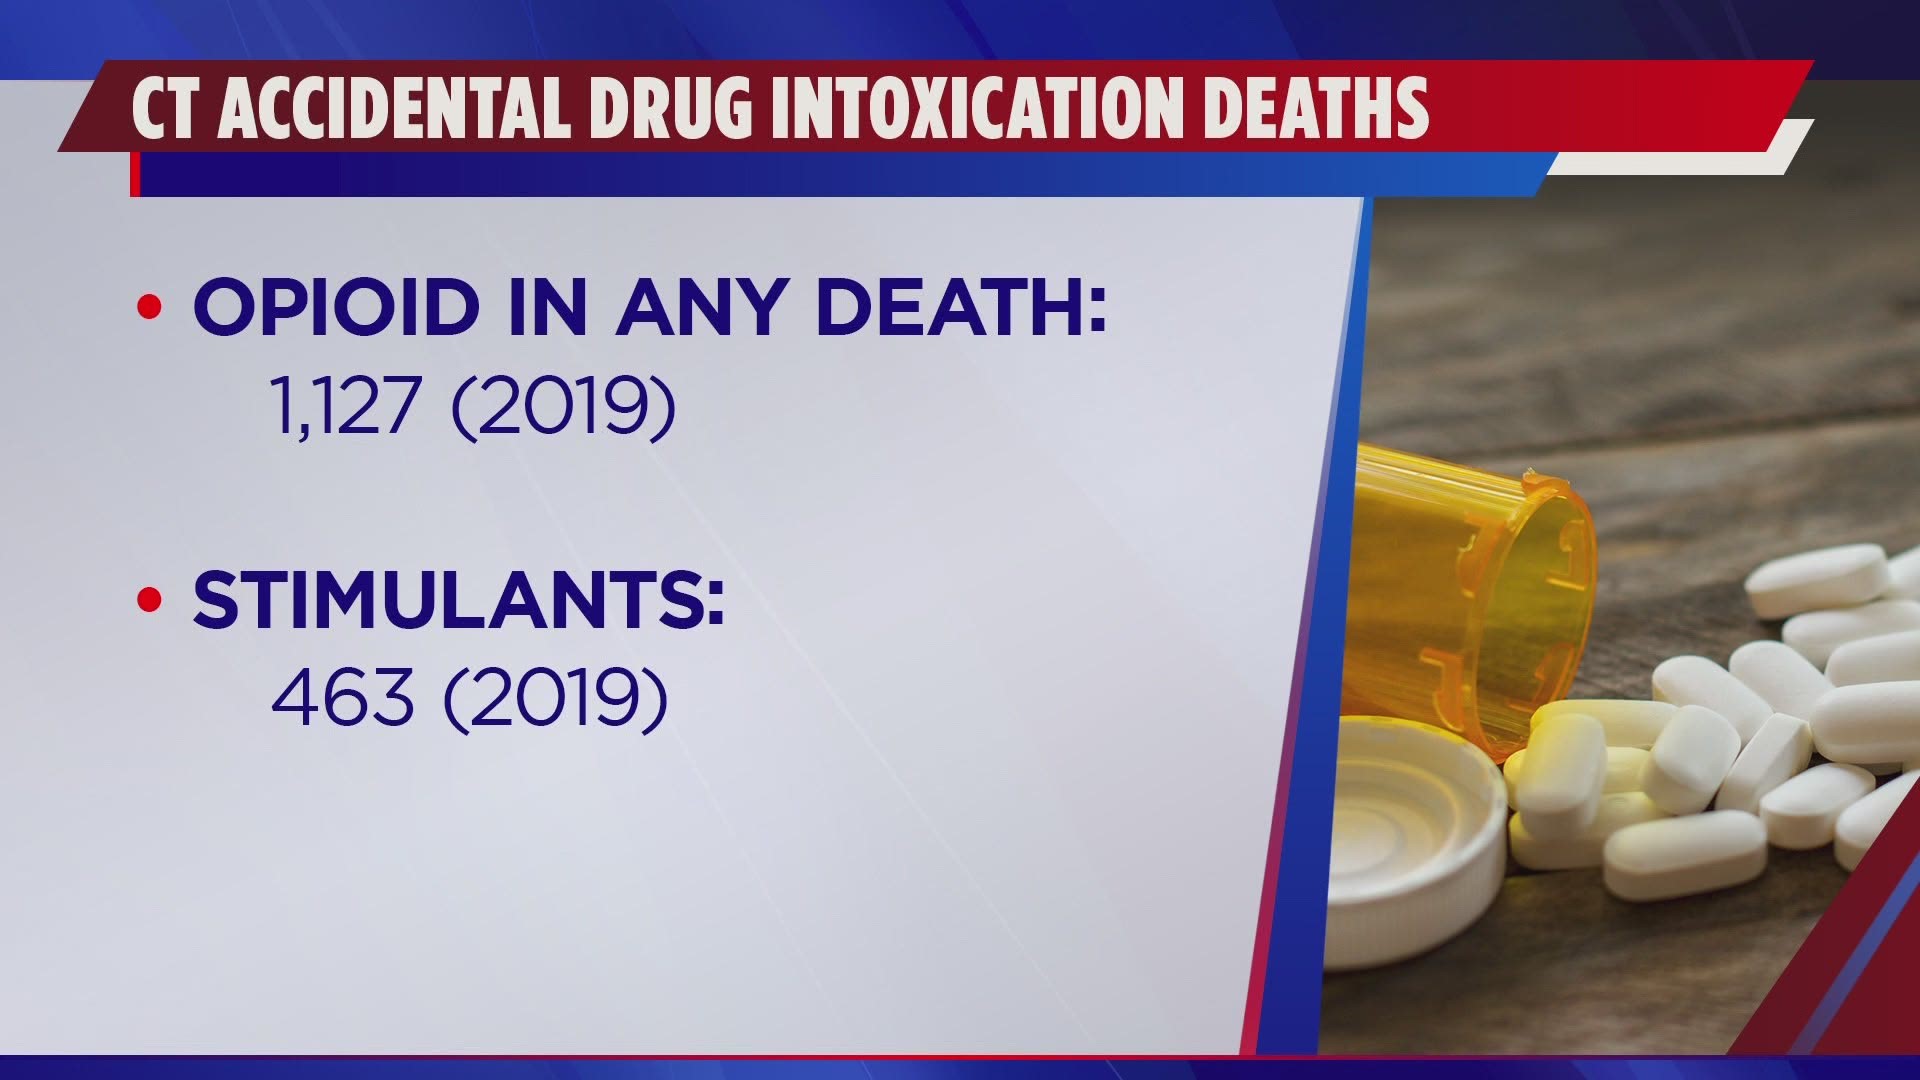 A report released by the Chief State Medical Examiner showed the number of drug overdose deaths went up 20% in 2019.